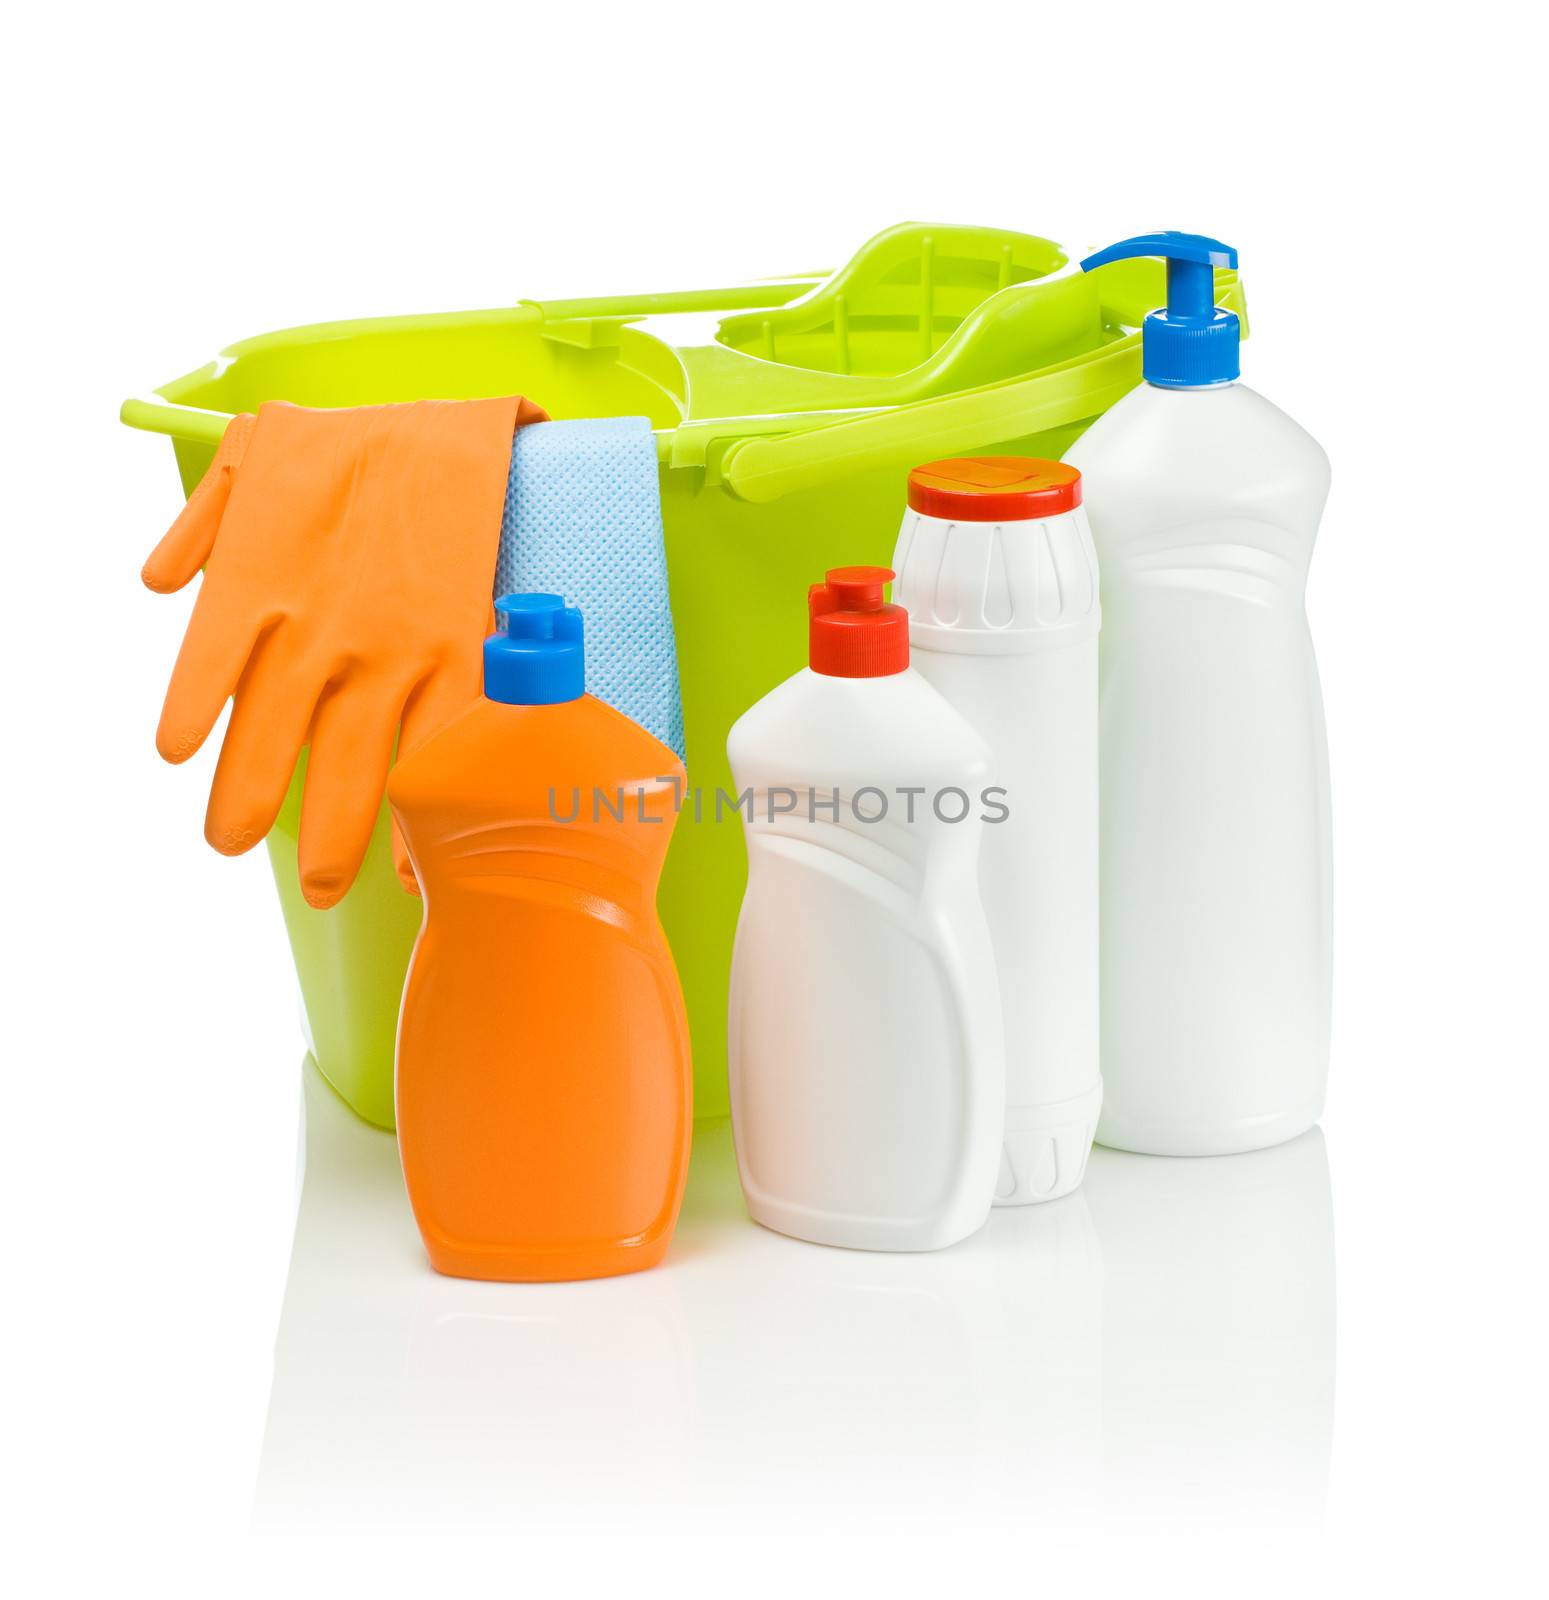 cleaning accessories with green bucket by mihalec